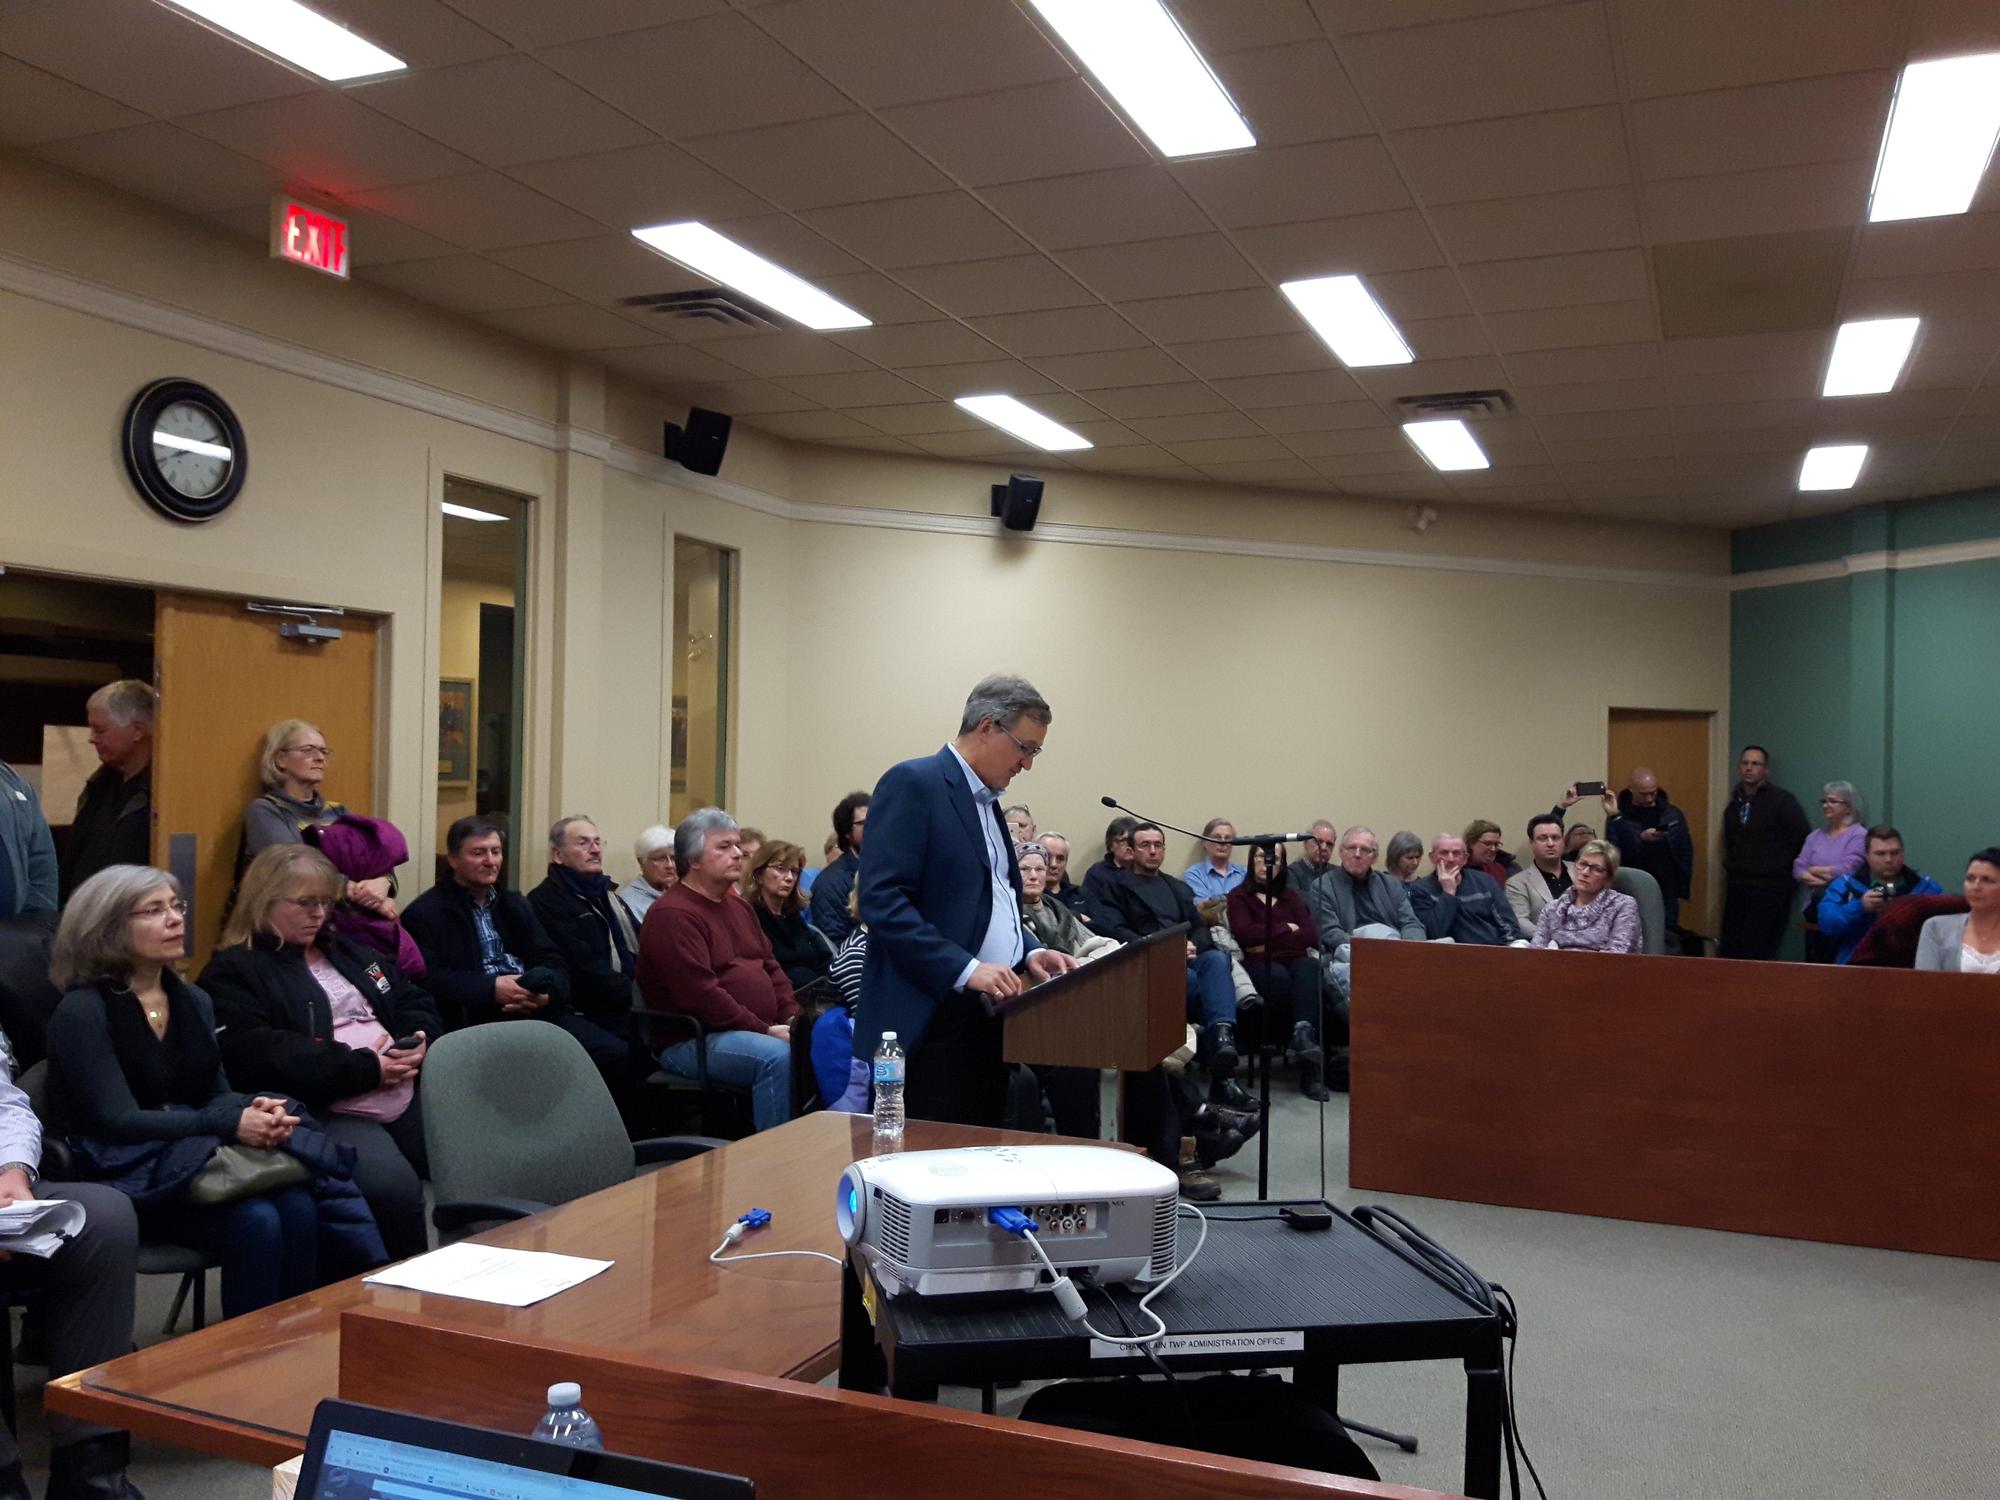 Action Champlain wants township to share costs of preparing for OMB hearing